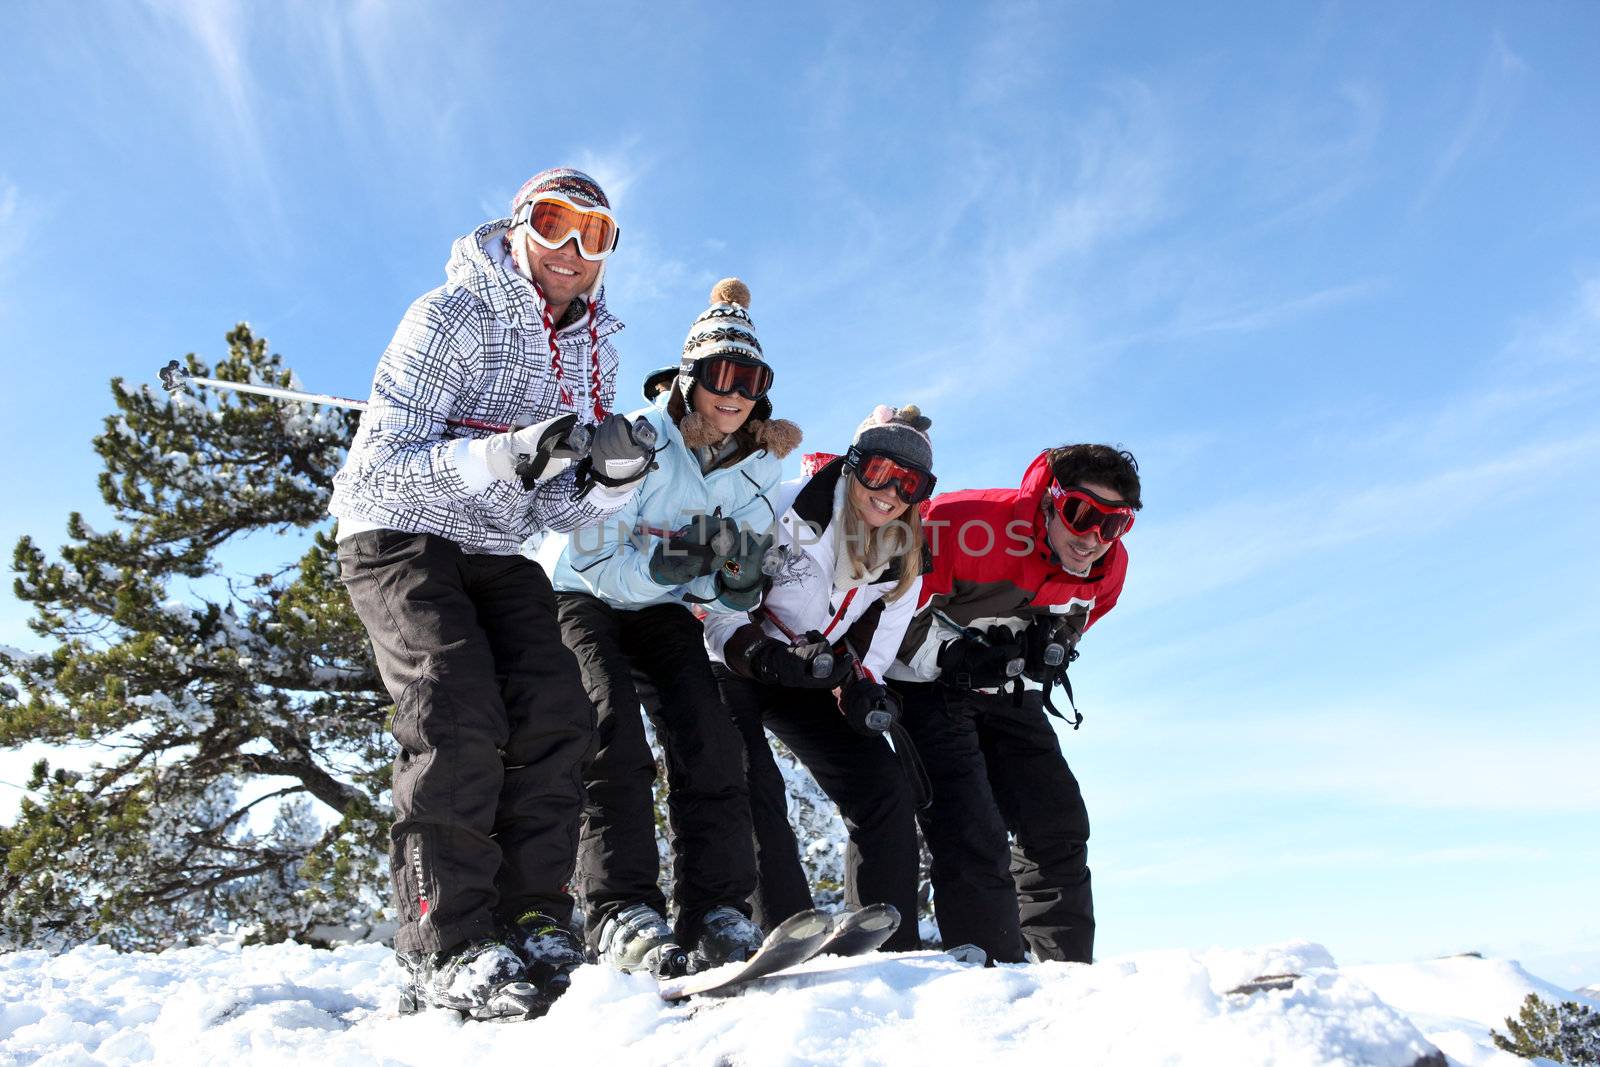 Four friends skiing together on holiday by phovoir